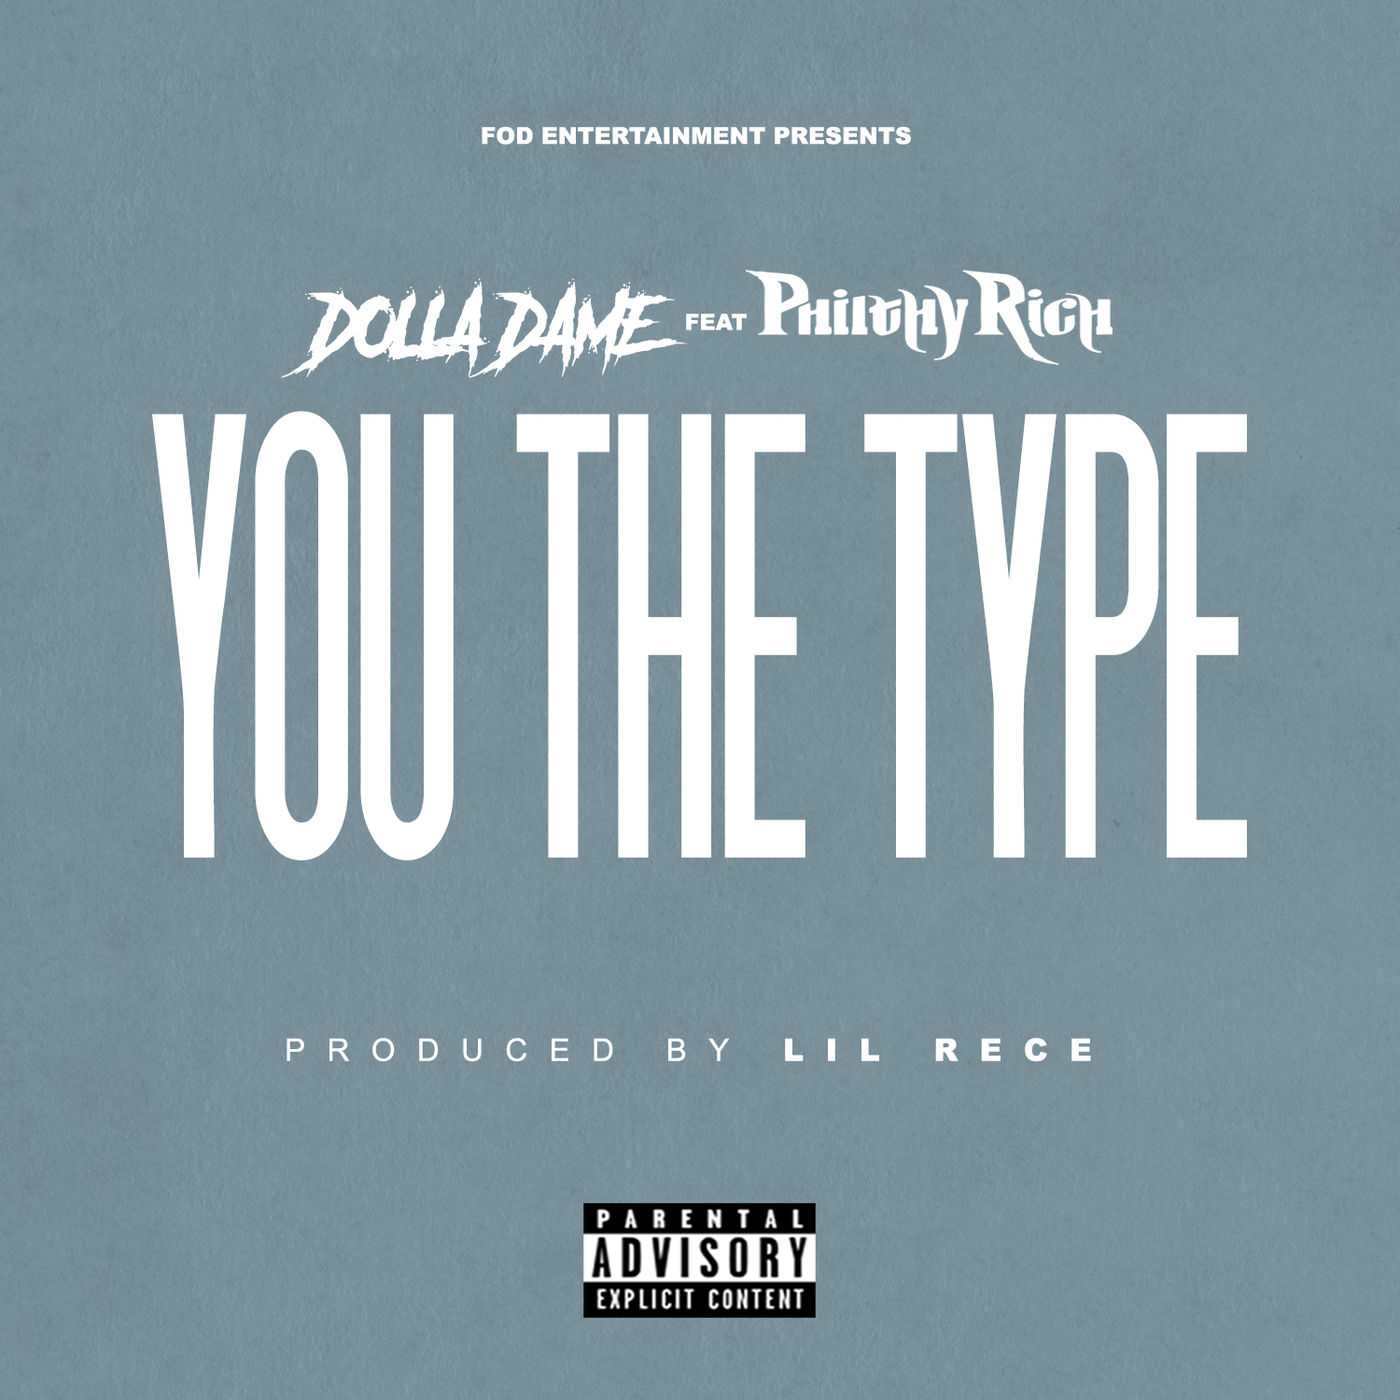 Dolla Dame & Philthy Rich - You The Type